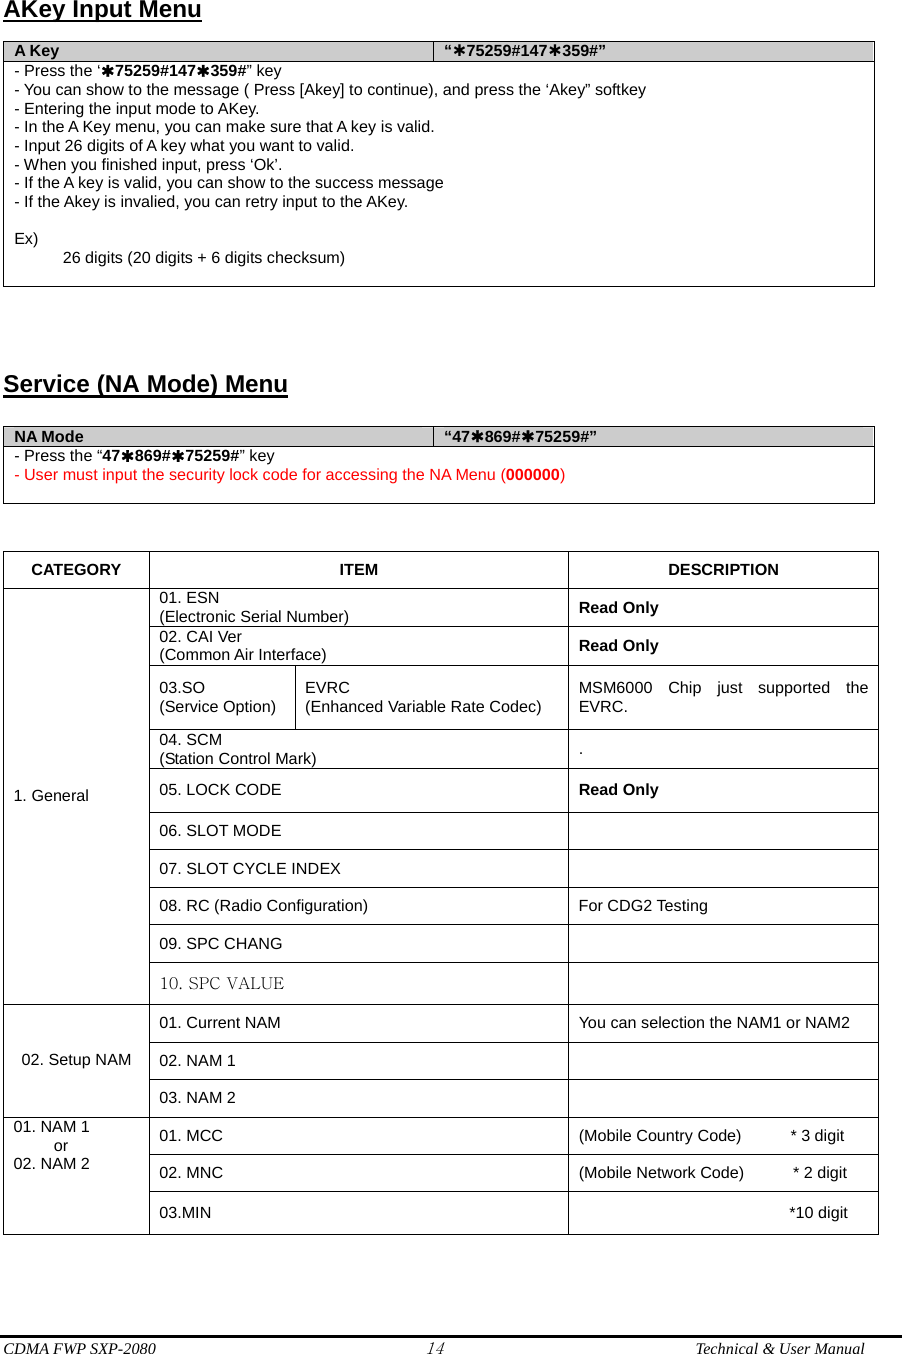  CDMA FWP SXP-2080 14  Technical &amp; User Manual   AKey Input Menu  A Key  “À75259#147À359#” - Press the ‘À75259#147À359#” key - You can show to the message ( Press [Akey] to continue), and press the ‘Akey” softkey - Entering the input mode to AKey. - In the A Key menu, you can make sure that A key is valid. - Input 26 digits of A key what you want to valid. - When you finished input, press ‘Ok’. - If the A key is valid, you can show to the success message - If the Akey is invalied, you can retry input to the AKey.  Ex)  26 digits (20 digits + 6 digits checksum)     Service (NA Mode) Menu  NA Mode  “47À869#À75259#” - Press the “47À869#À75259#” key   - User must input the security lock code for accessing the NA Menu (000000)    CATEGORY ITEM  DESCRIPTION 01. ESN (Electronic Serial Number)  Read Only 02. CAI Ver (Common Air Interface)  Read Only 03.SO (Service Option)  EVRC (Enhanced Variable Rate Codec)  MSM6000 Chip just supported the EVRC. 04. SCM (Station Control Mark)  . 05. LOCK CODE  Read Only 06. SLOT MODE   07. SLOT CYCLE INDEX   08. RC (Radio Configuration)  For CDG2 Testing 09. SPC CHANG   1. General   10. SPC VALUE   01. Current NAM  You can selection the NAM1 or NAM2 02. NAM 1   02. Setup NAM 03. NAM 2   01. MCC                  (Mobile Country Code)      * 3 digit 02. MNC  (Mobile Network Code)      * 2 digit 01. NAM 1   or  02. NAM 2 03.MIN   *10 digit 